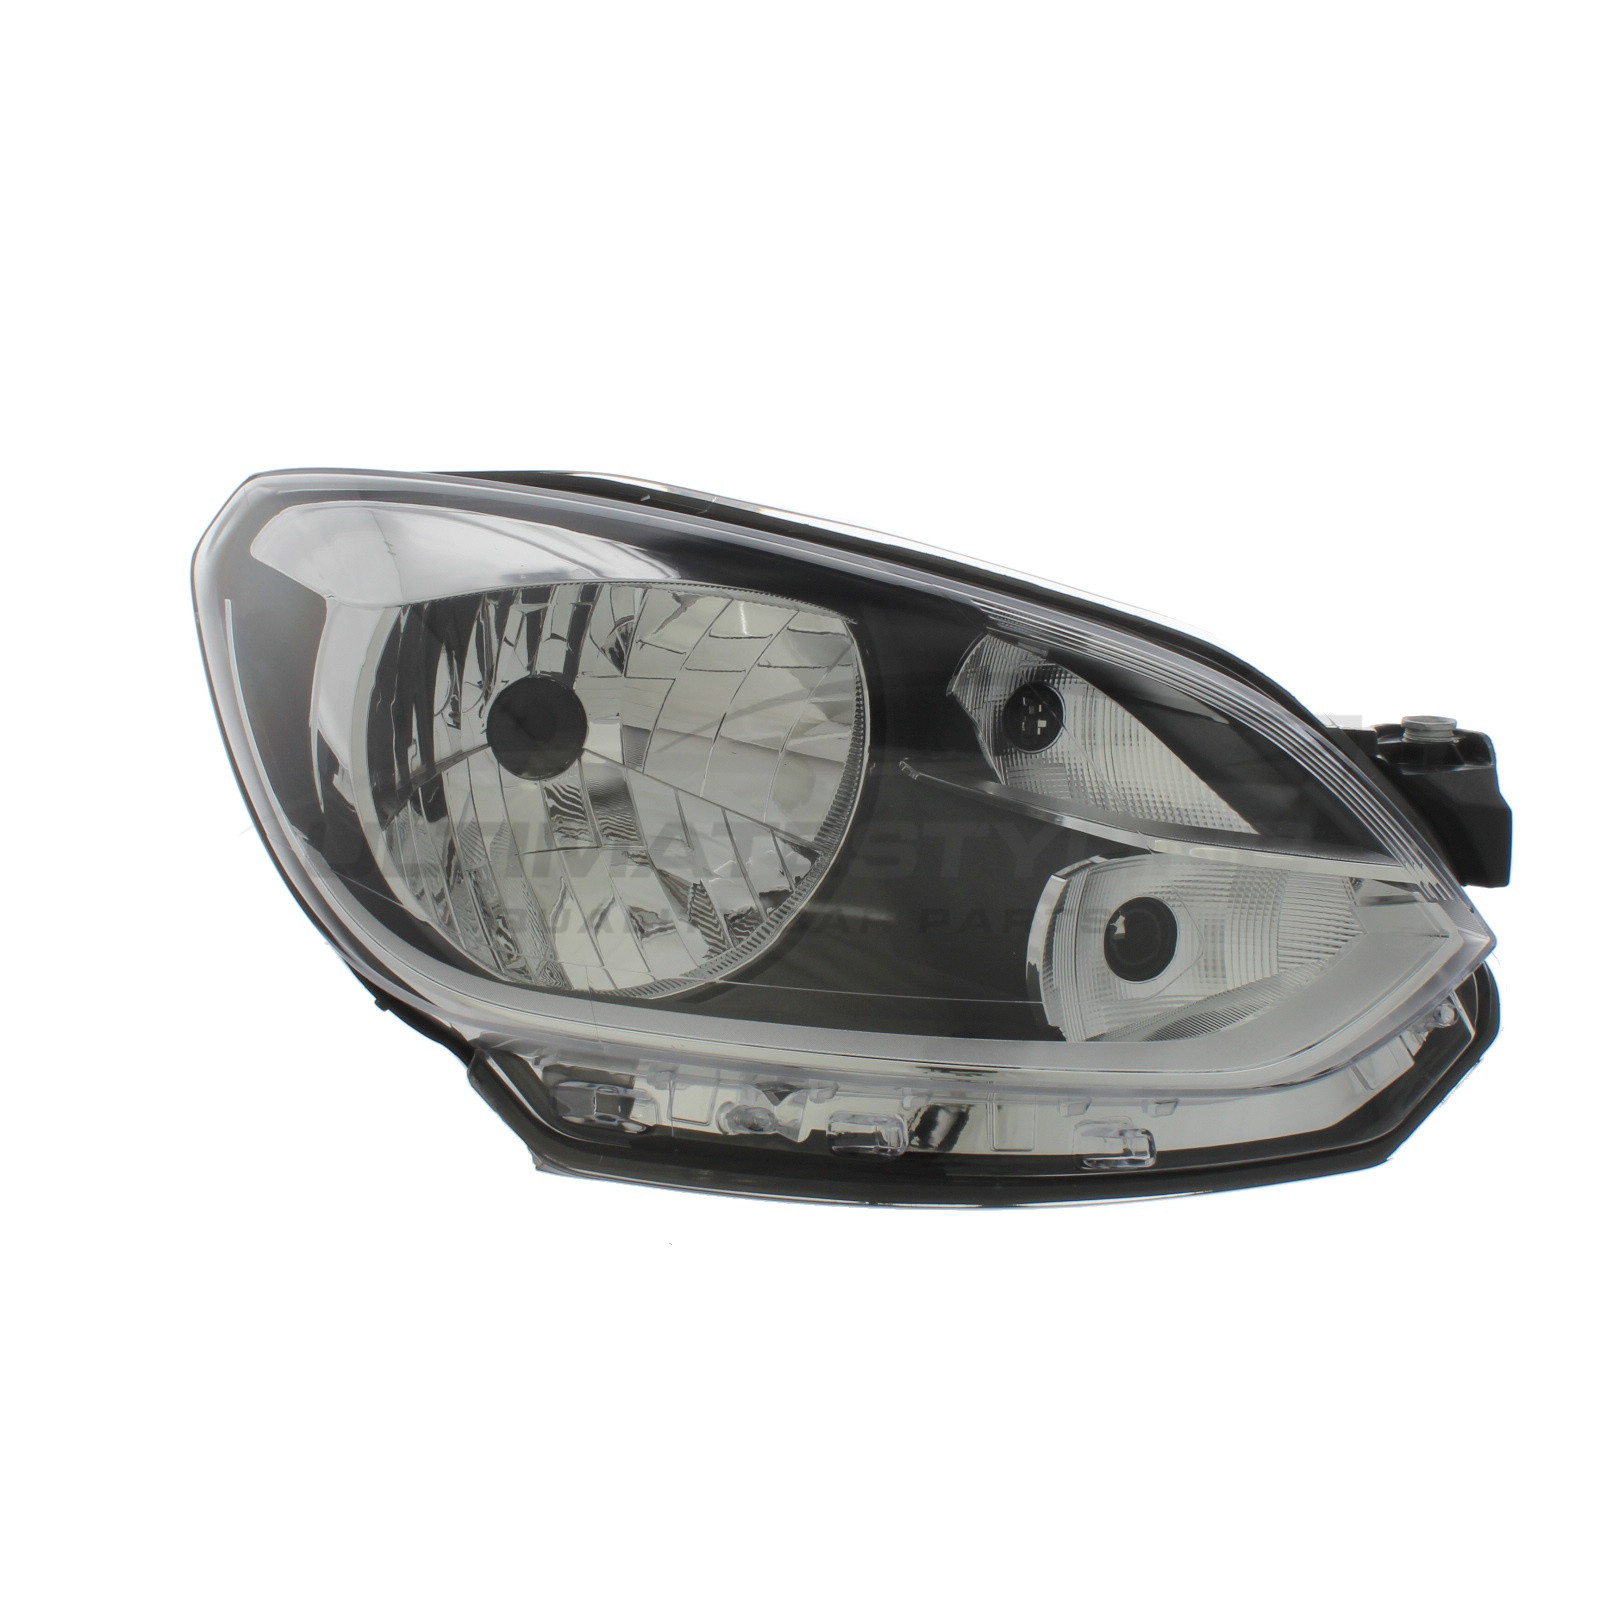 VW Up 2012-2016 Halogen, Electric Without Motor, Black Headlight / Headlamp with Chrome Surround Drivers Side (RH)